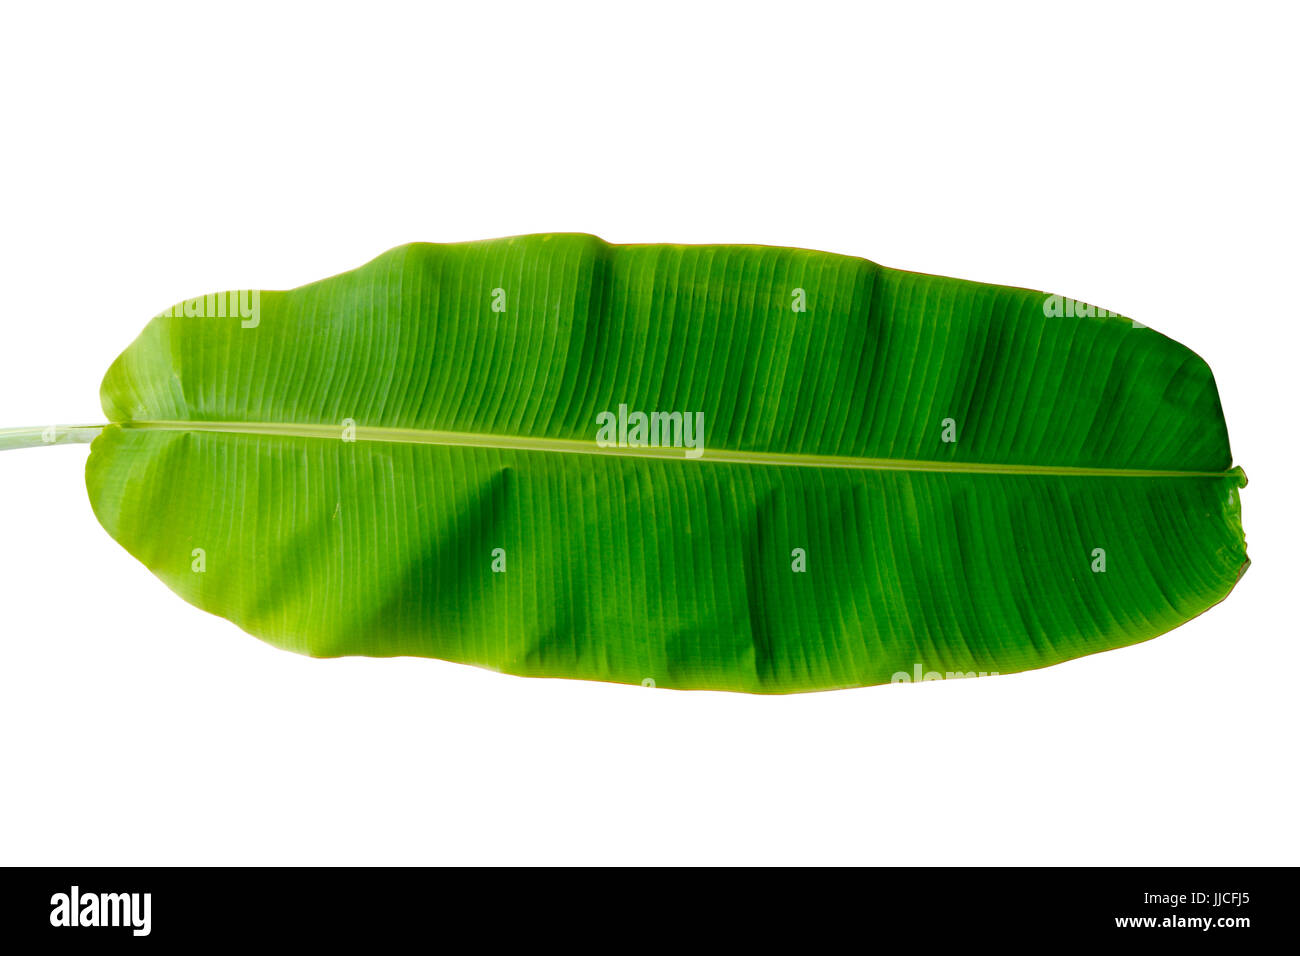 Green banana leaf,Bananas have green fiber leaves visible,With water on the leaves.The branches and leaves  green on  white background,Clipping part Stock Photo